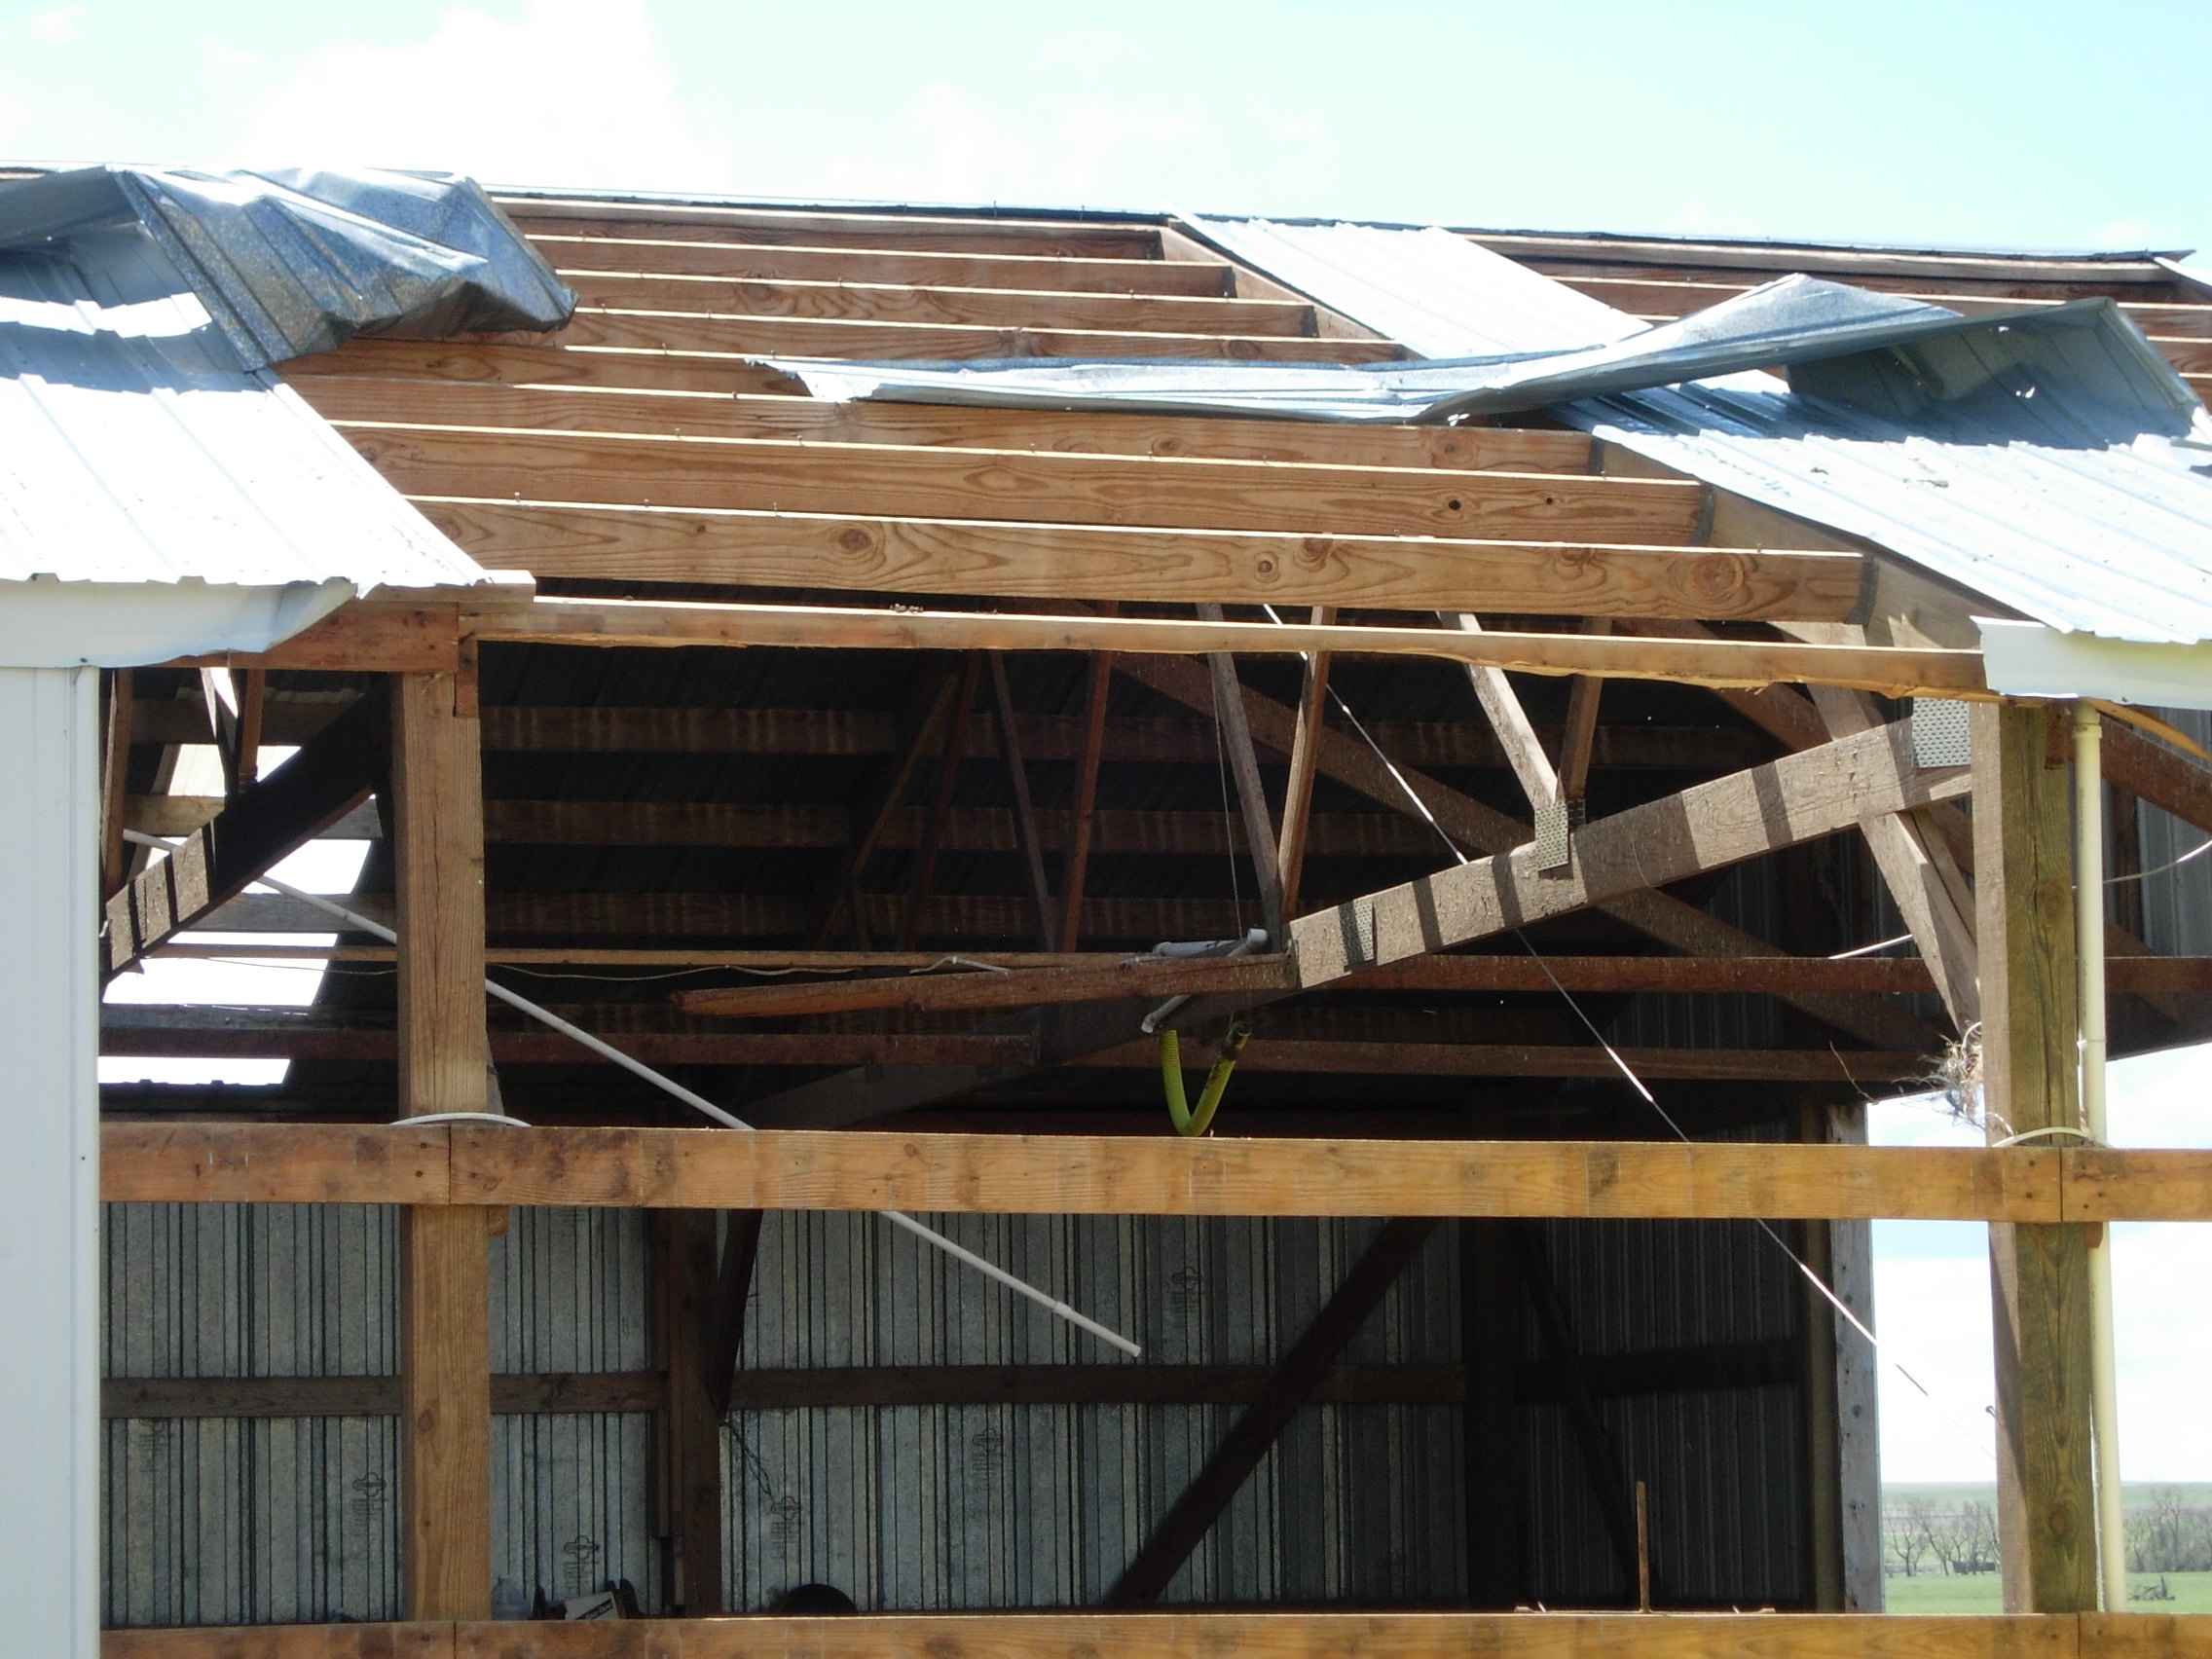 Damage to a barn roof and walls northeast of Dupree